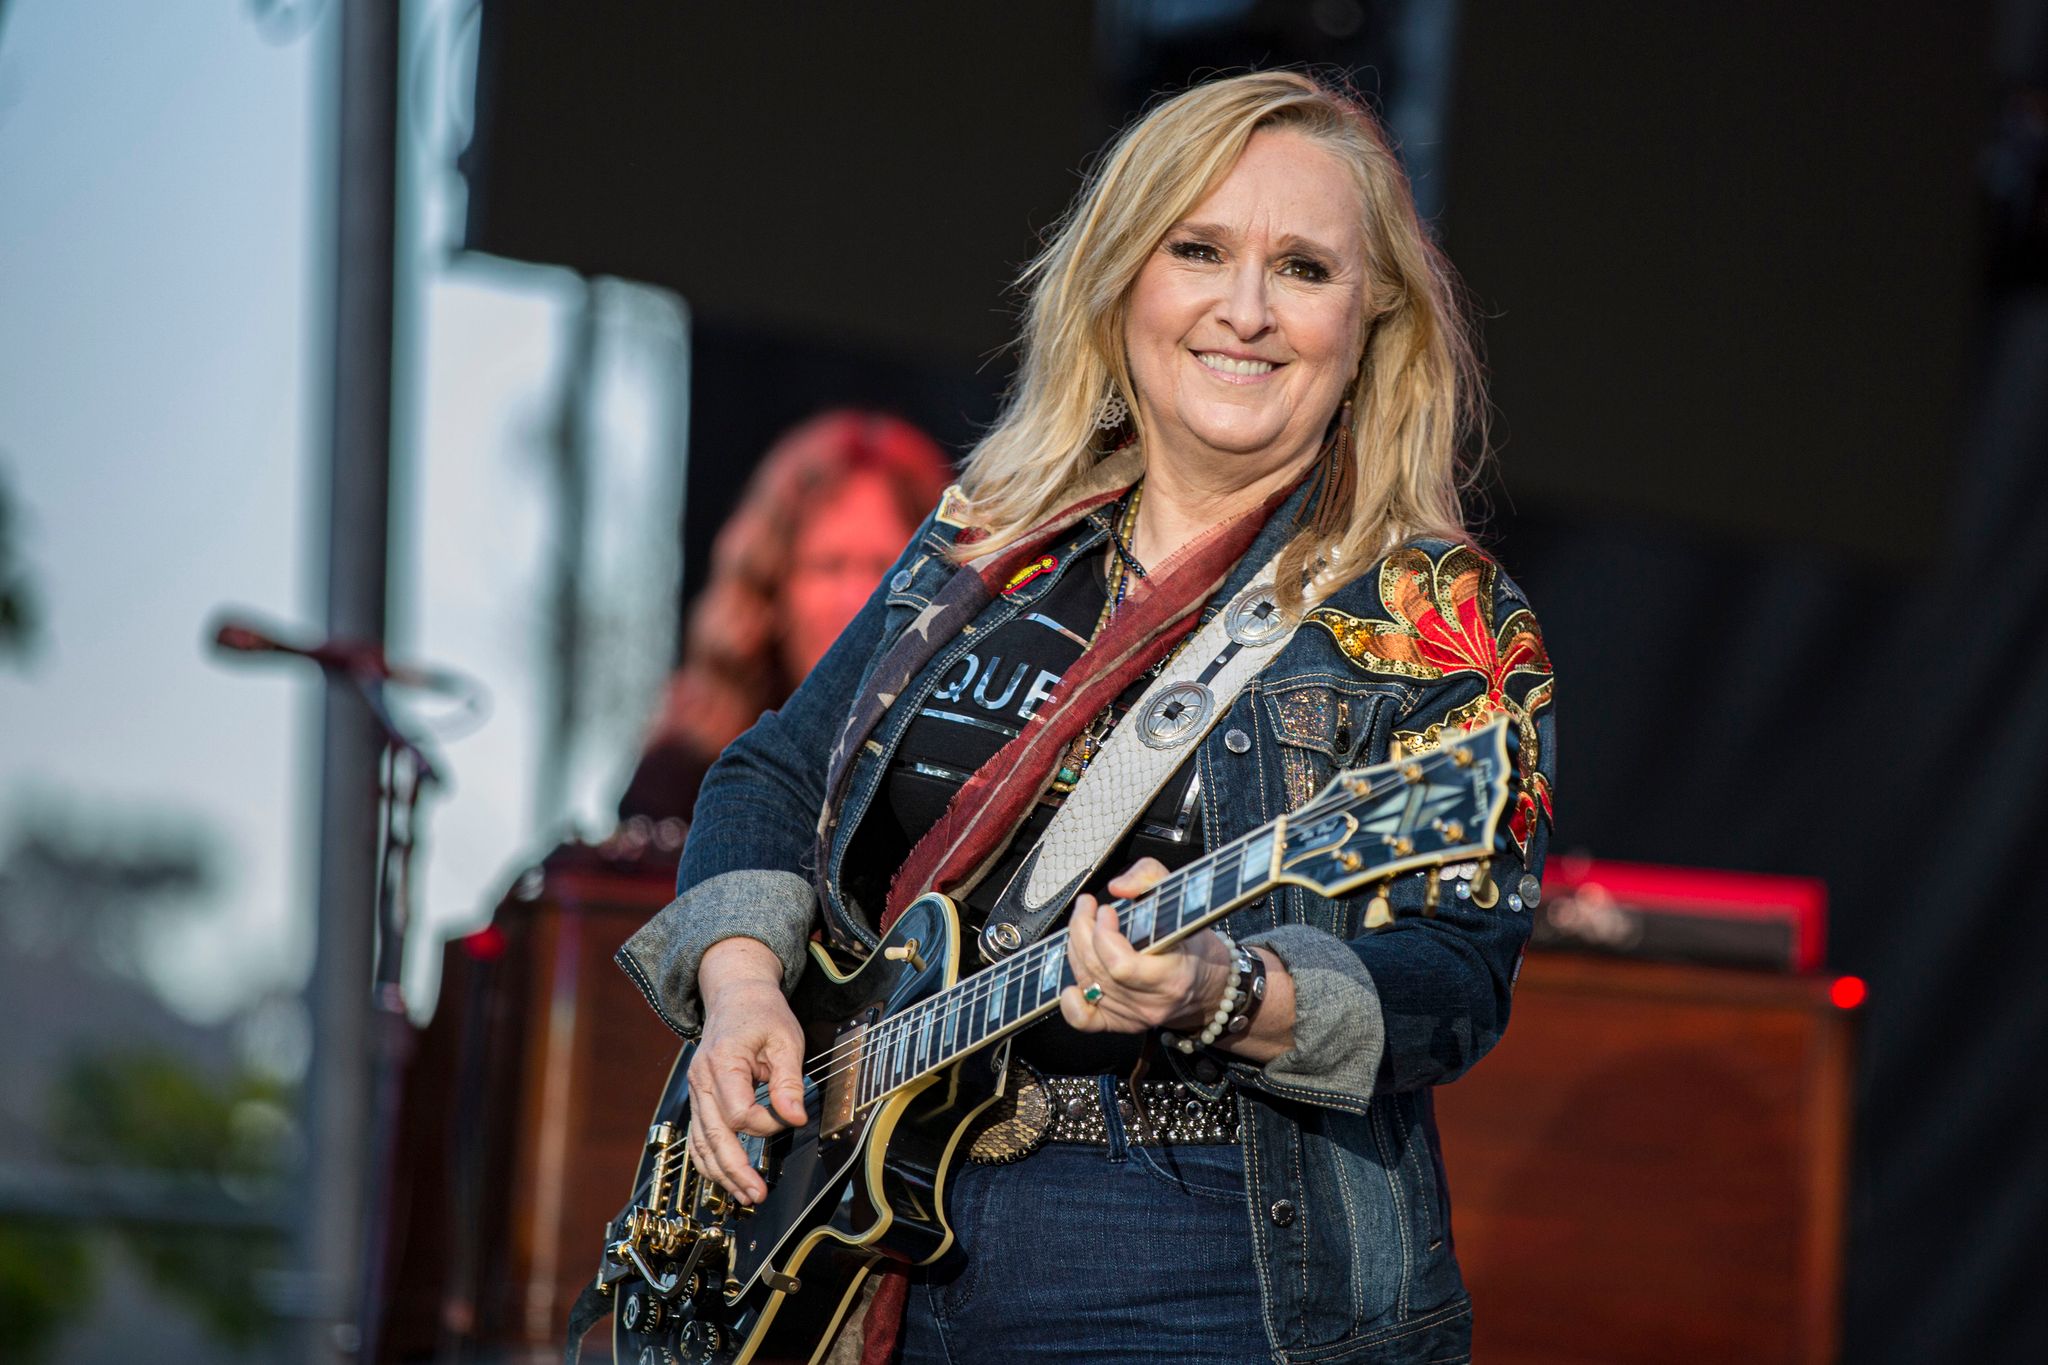 Musician Melissa Etheridge performs on stage at San Diego Pride Festival 2019| Photo: Getty Images